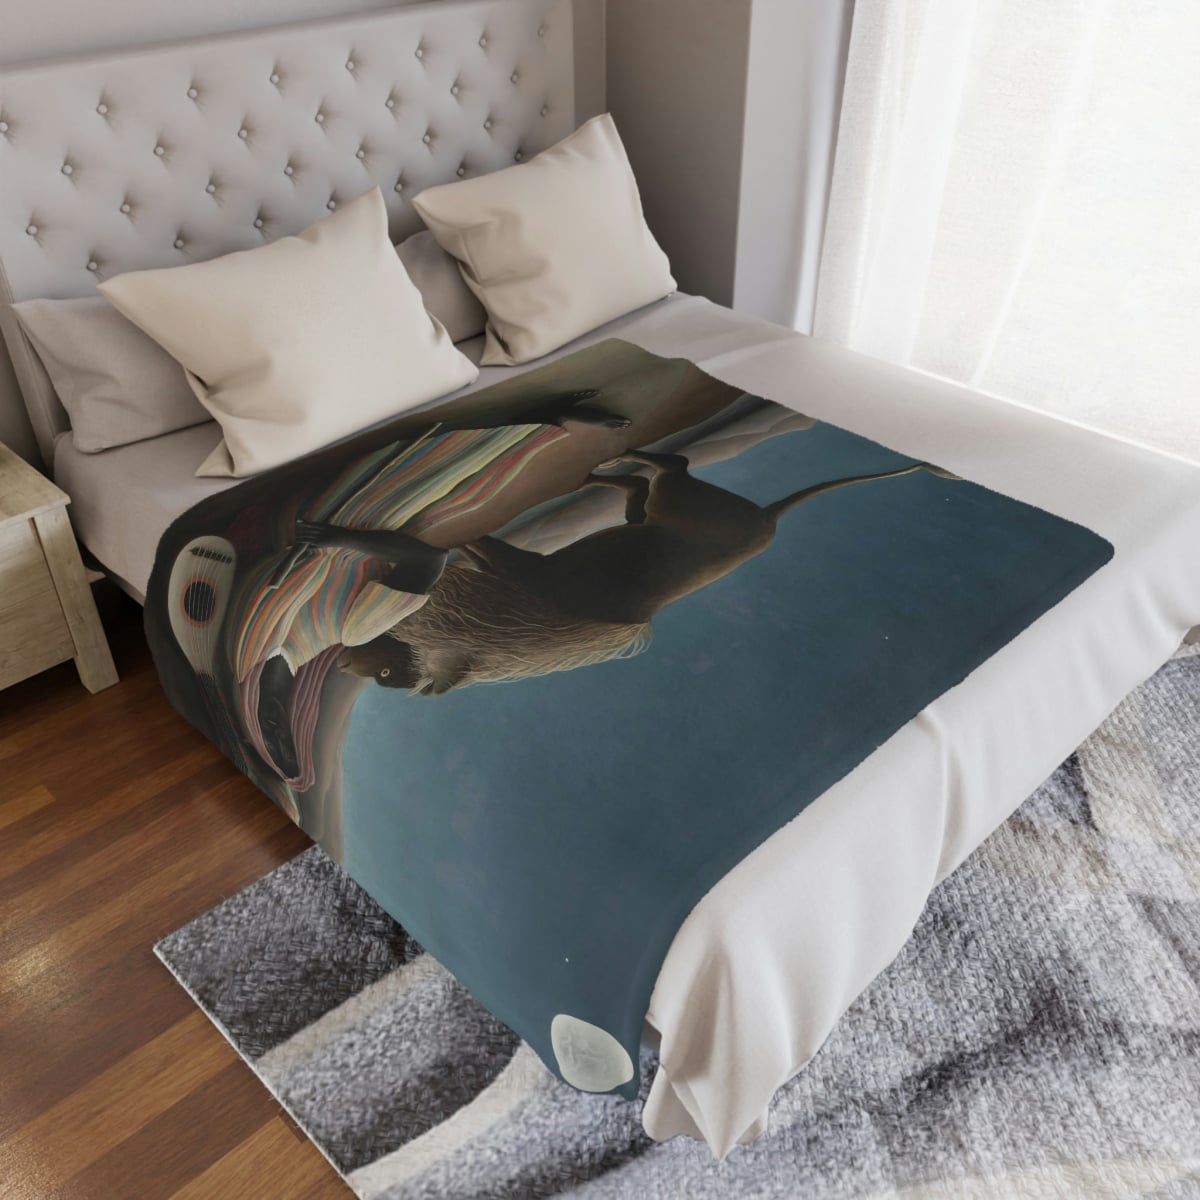 Soft and Luxurious Rousseau Art Blanket for Your Space